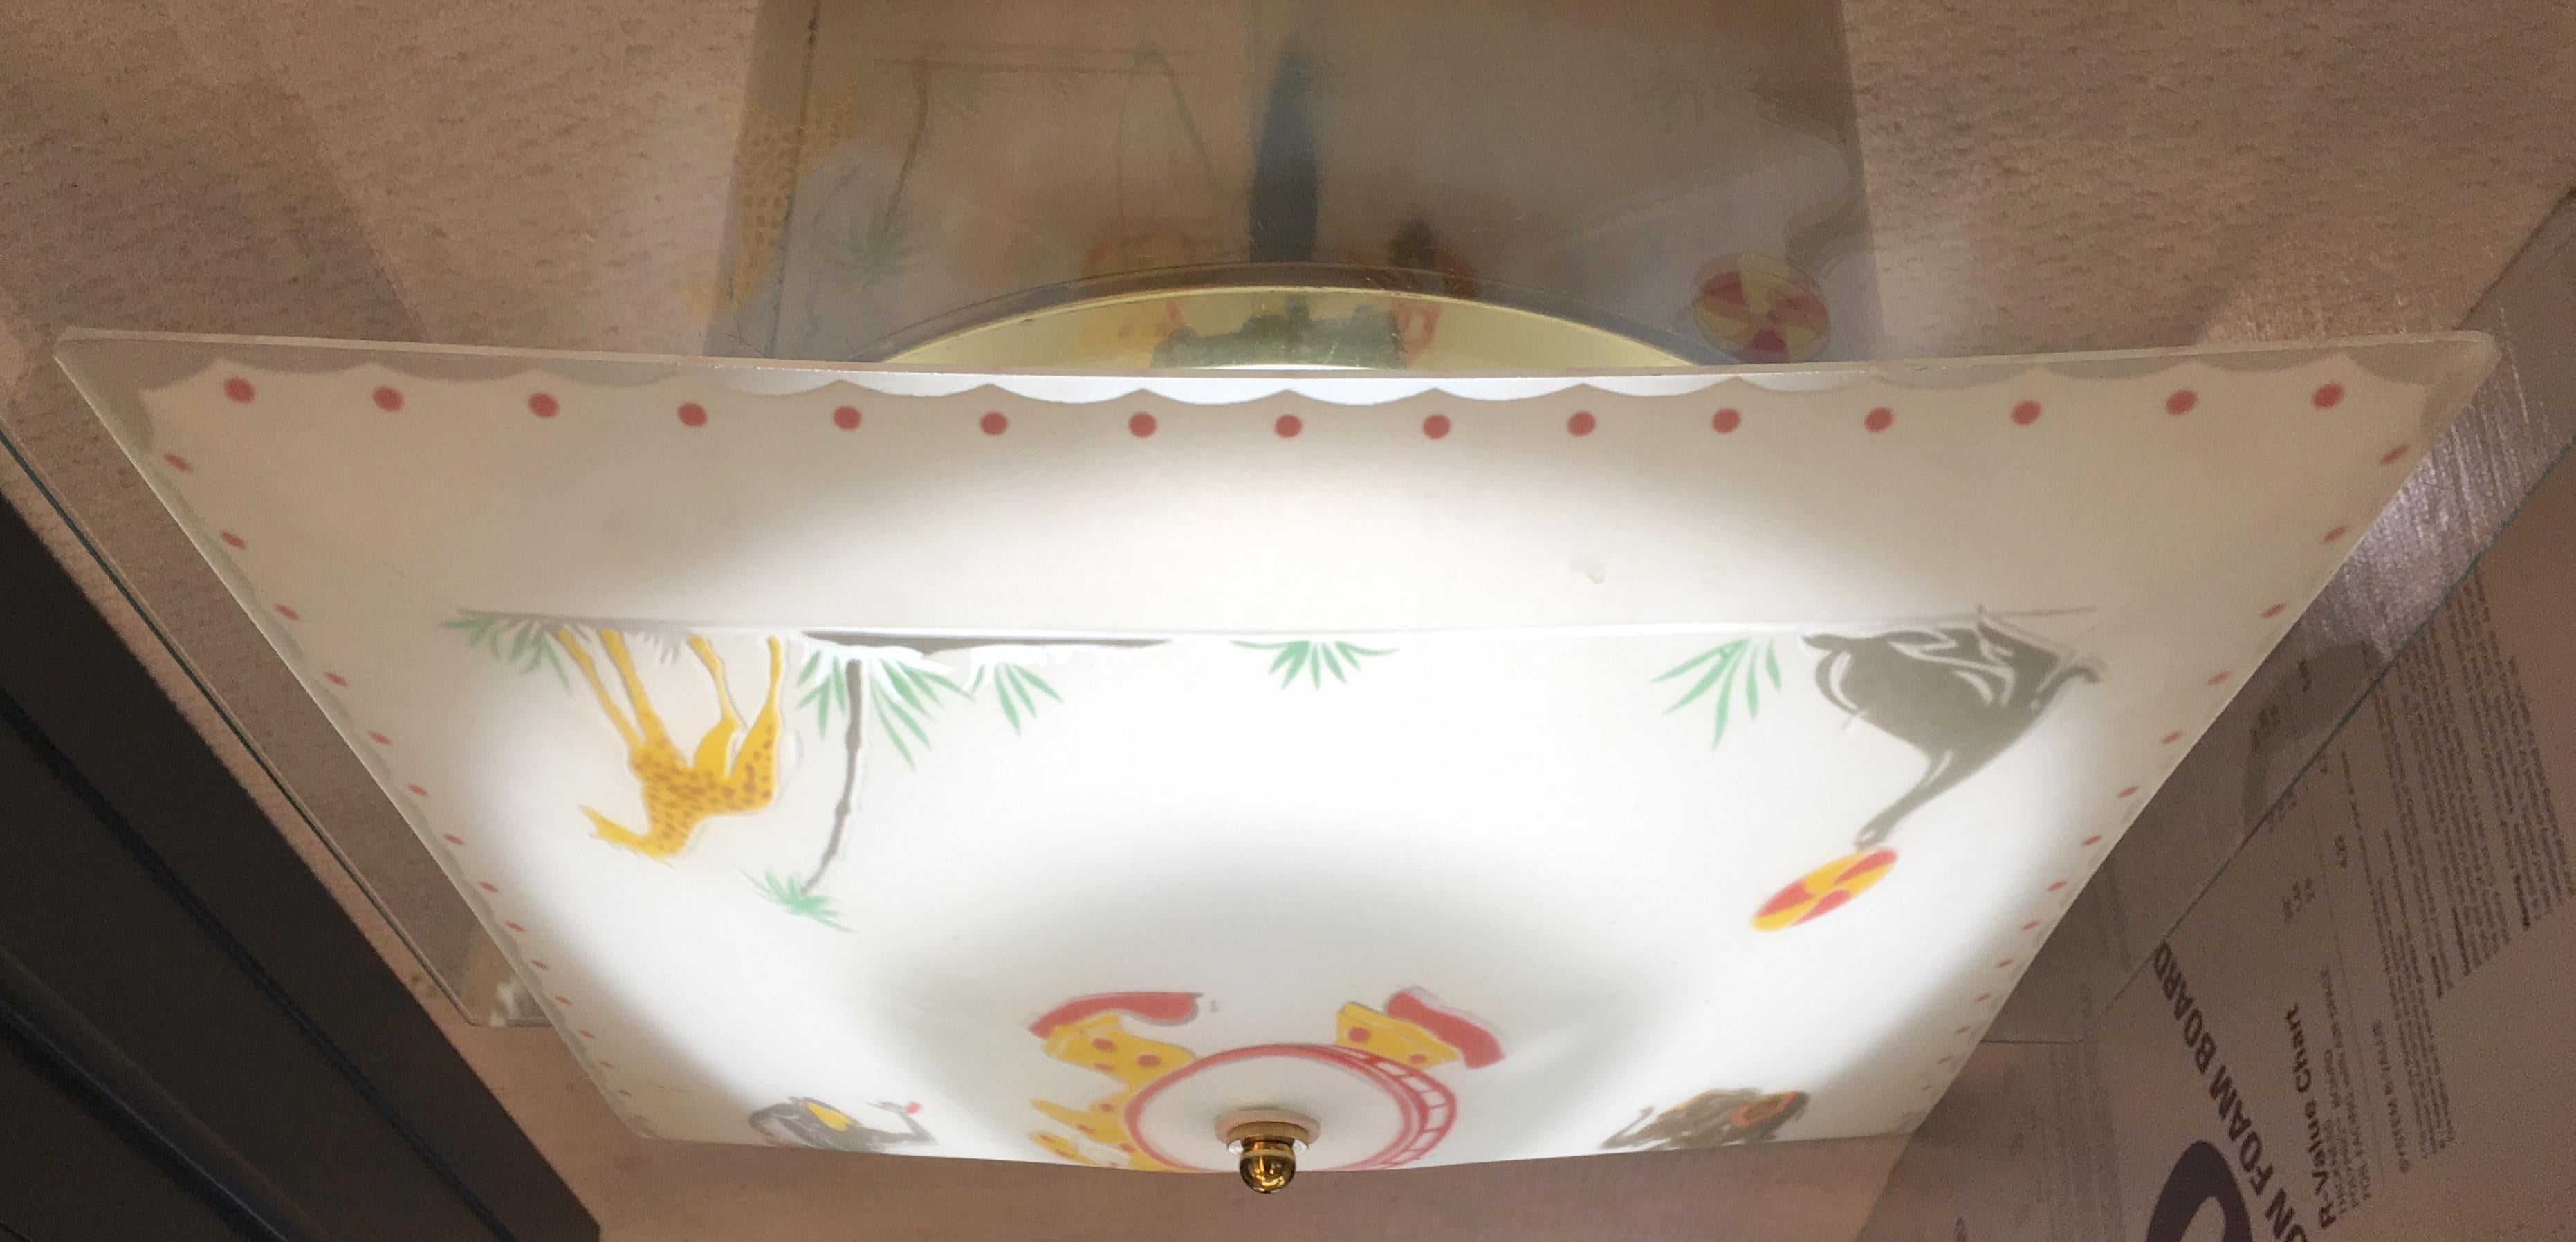 Simple yet chic square glass flush mount ceiling light consisting of a square moulded glass reflector in white satin finished and enameled with whimsical animal characters which show striking resemblance to the Hermes 